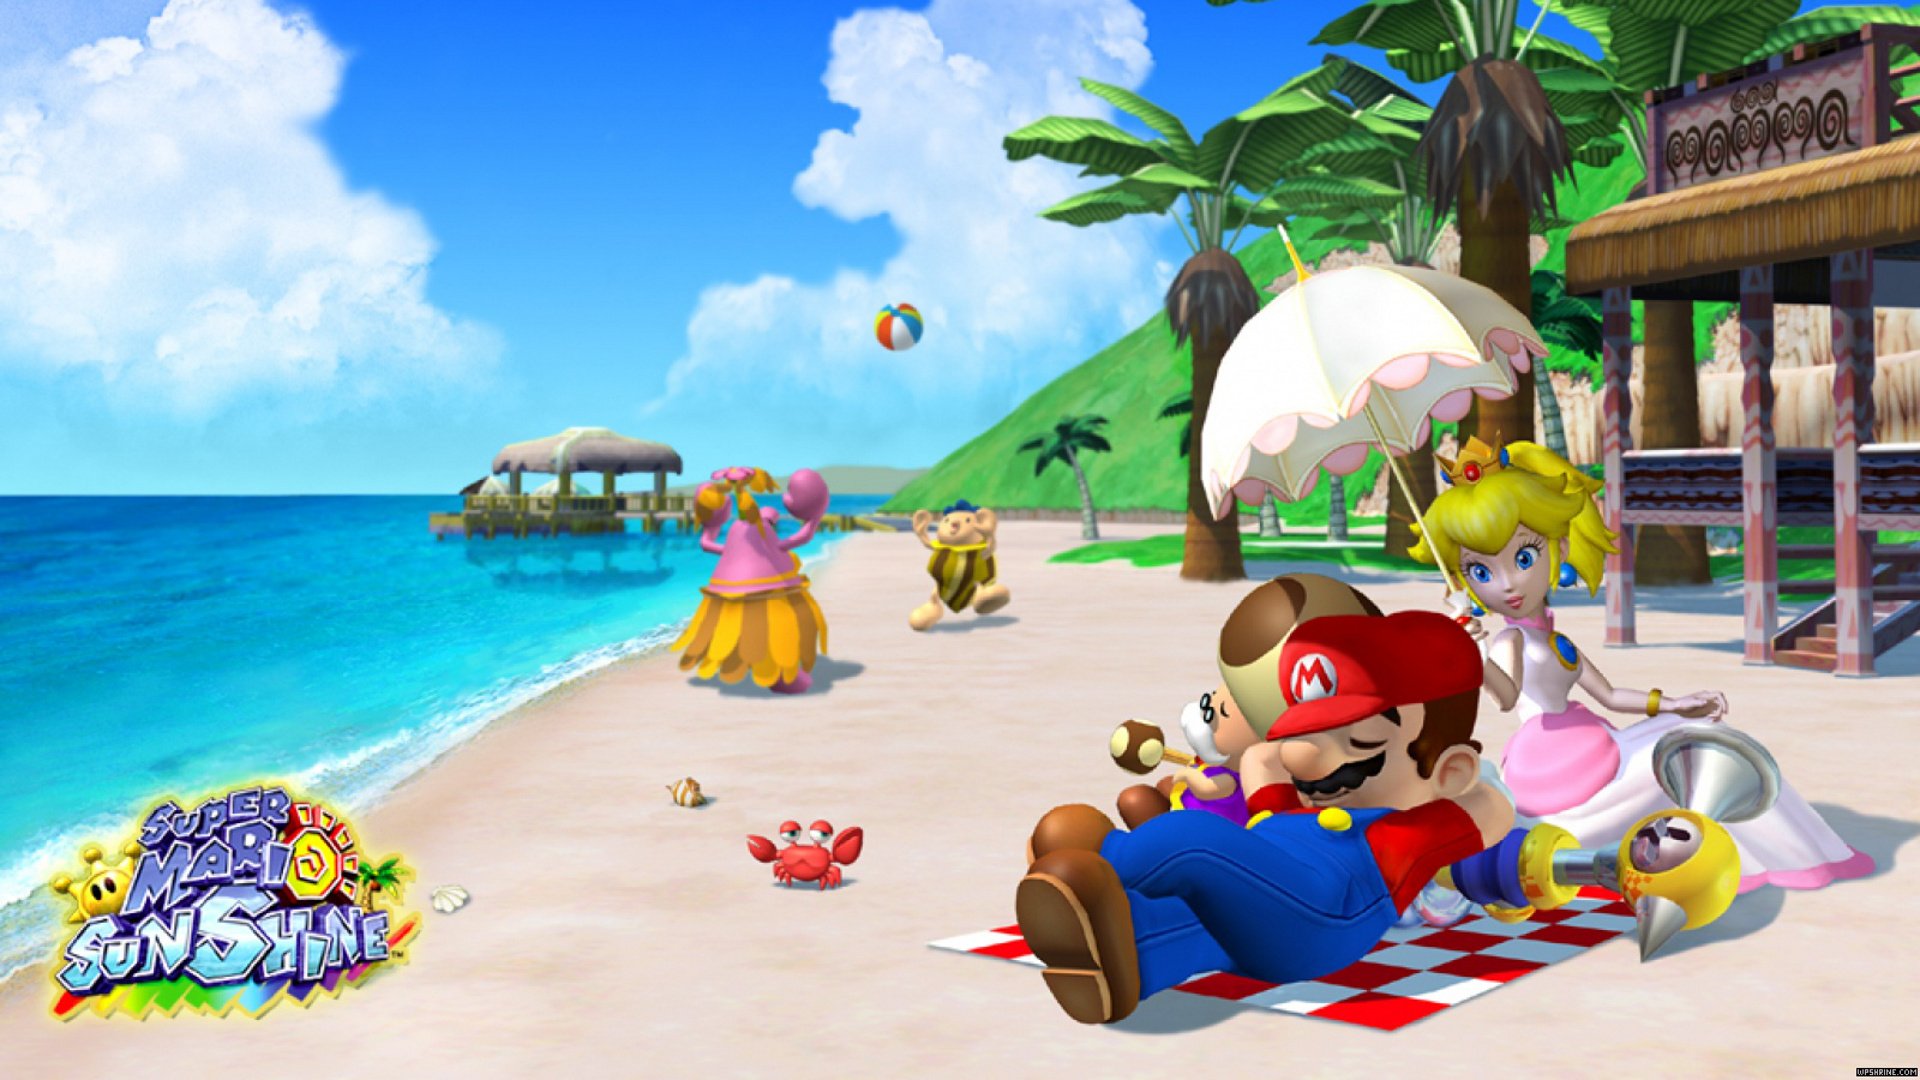 Super Mario Sunshine HD Wallpapers and Backgrounds